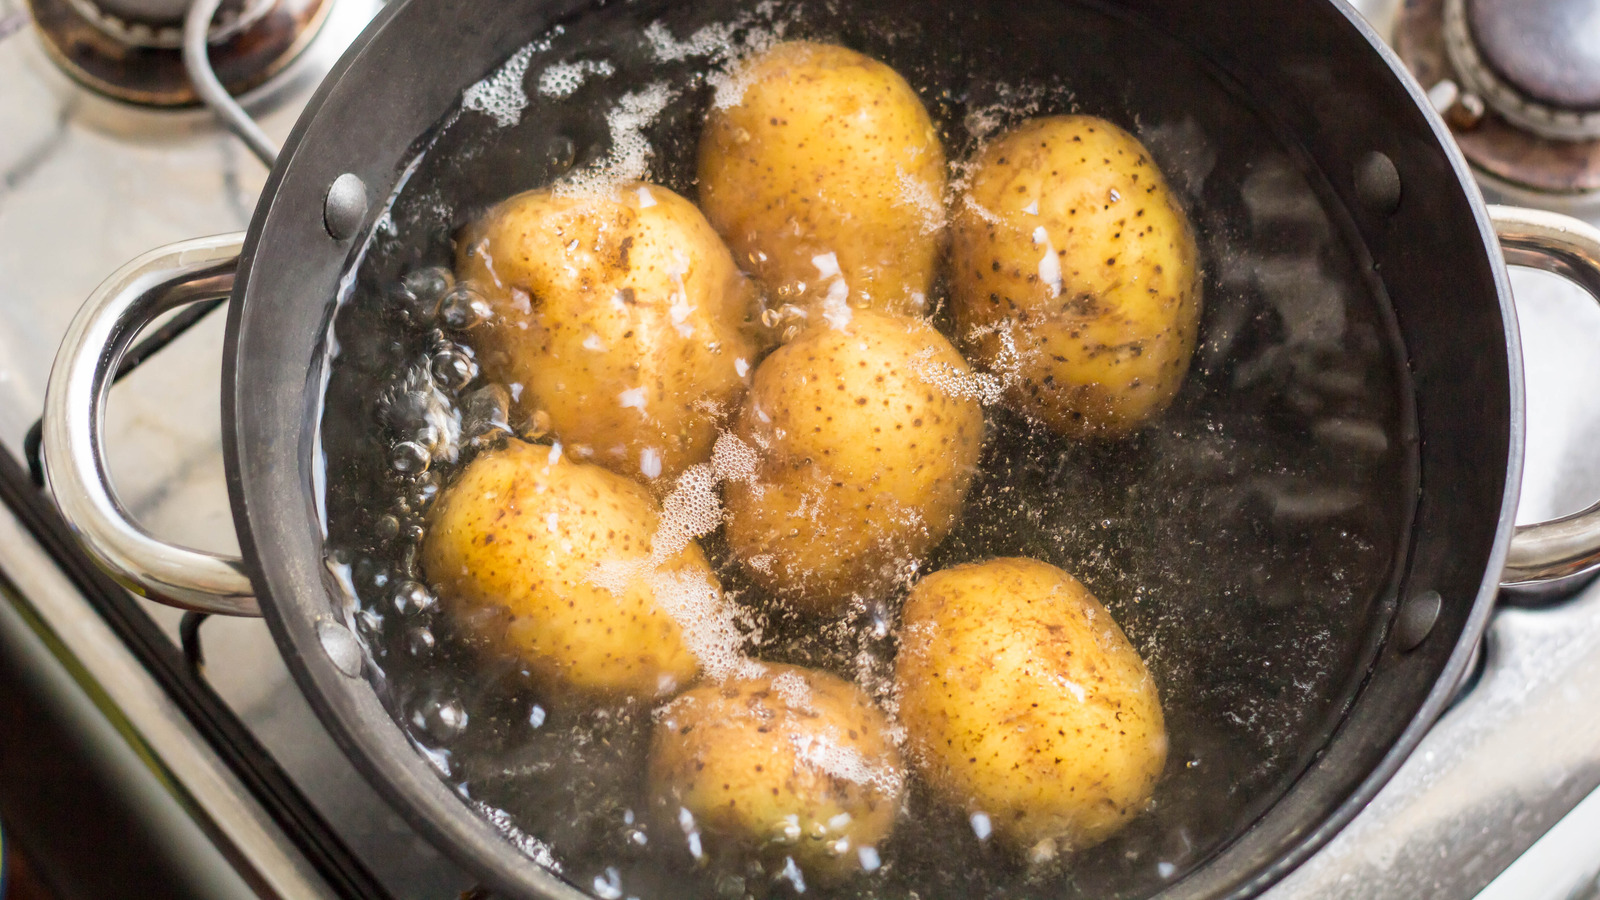 Boil your potatoes in chicken broth for a tastier mash